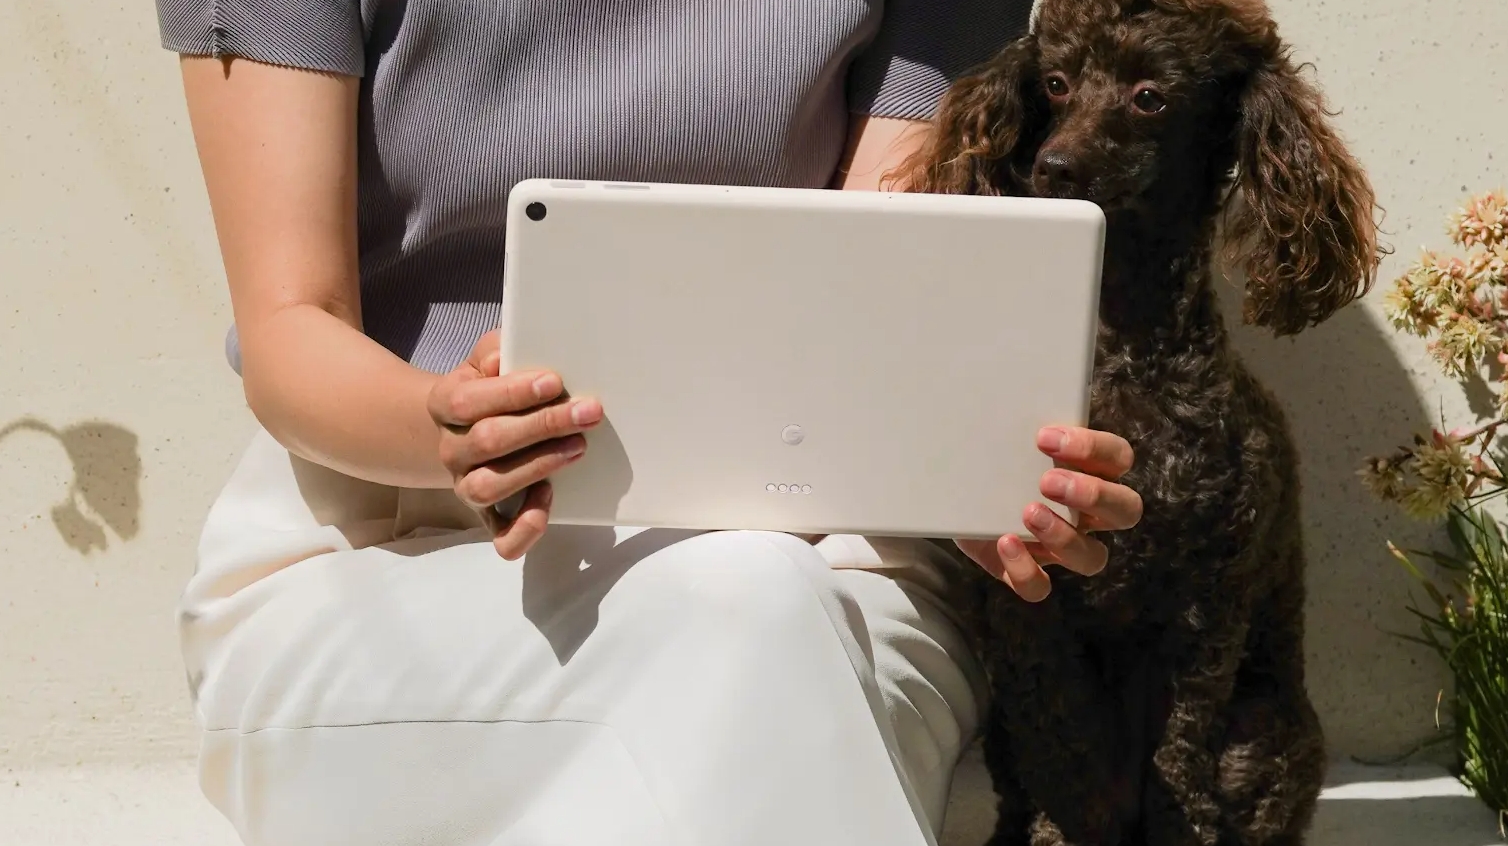 A photo of the Pixel Tablet from the back, in someone's hand